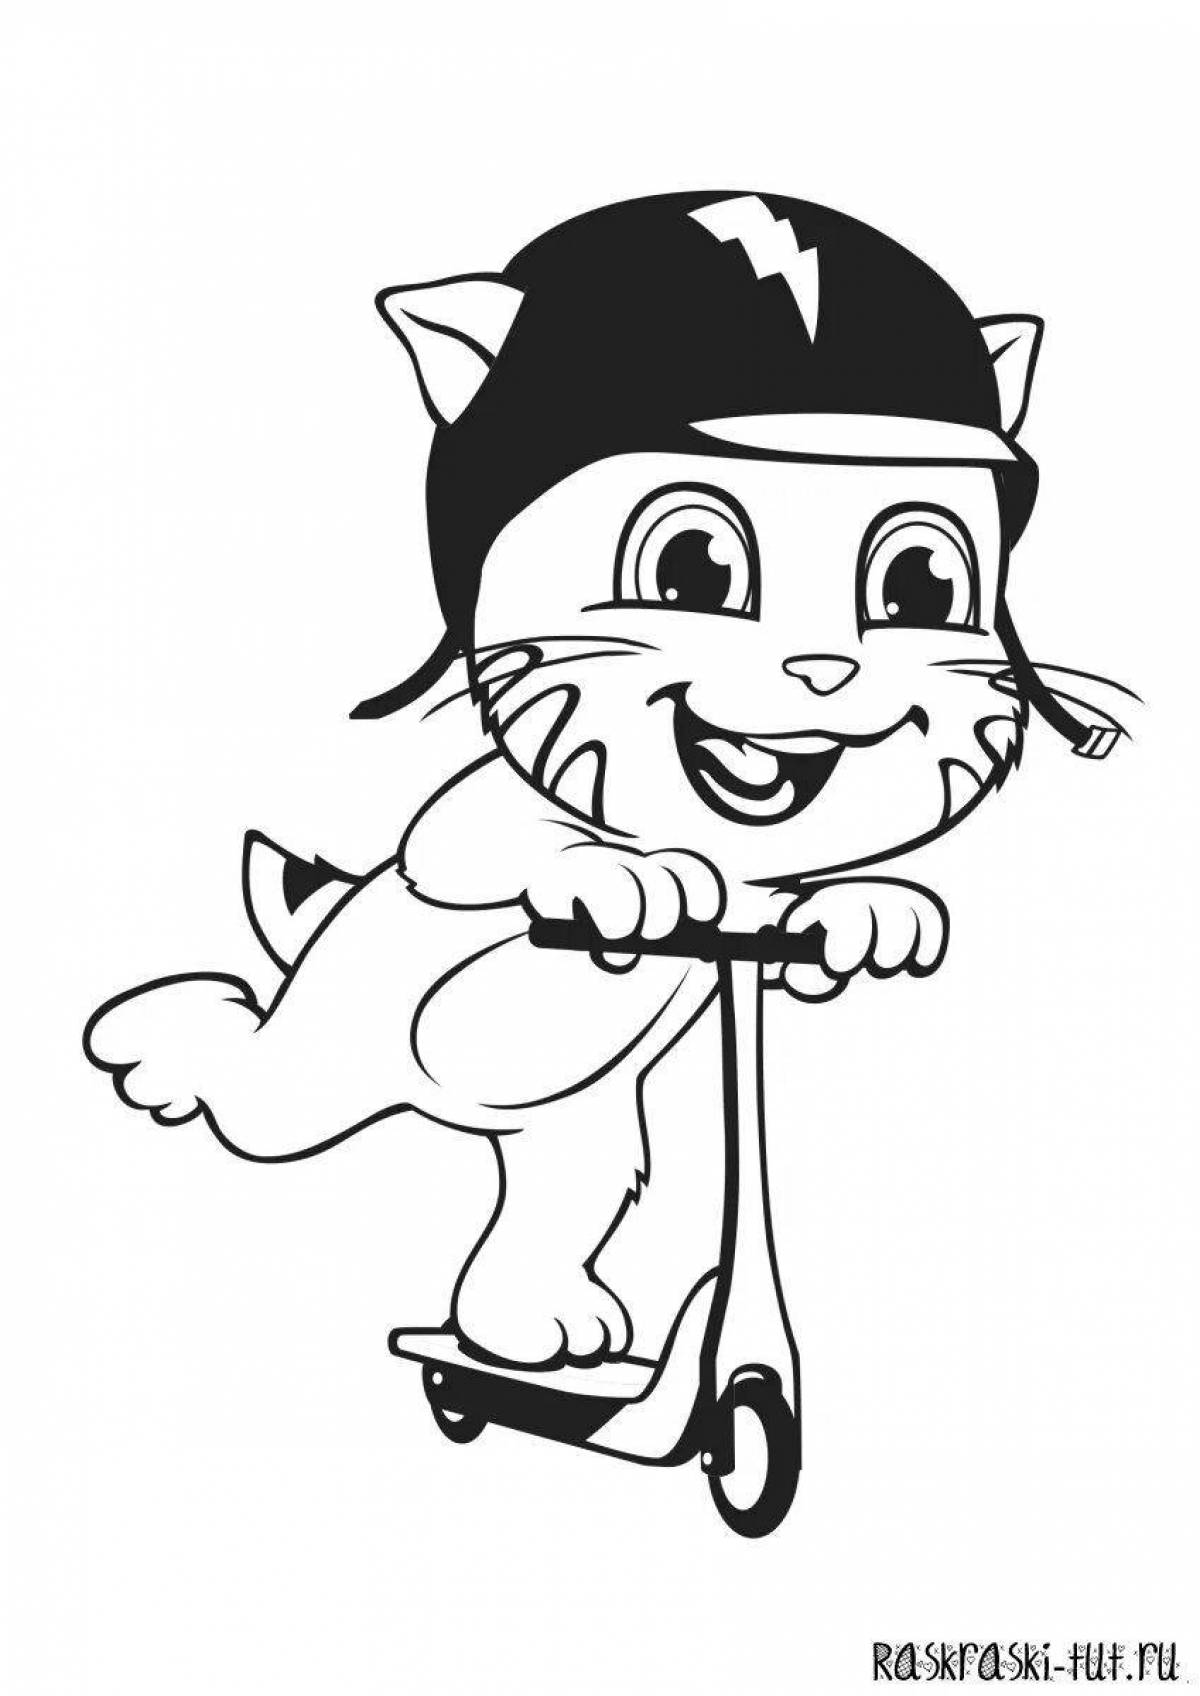 Fun tom and angela coloring pages for kids